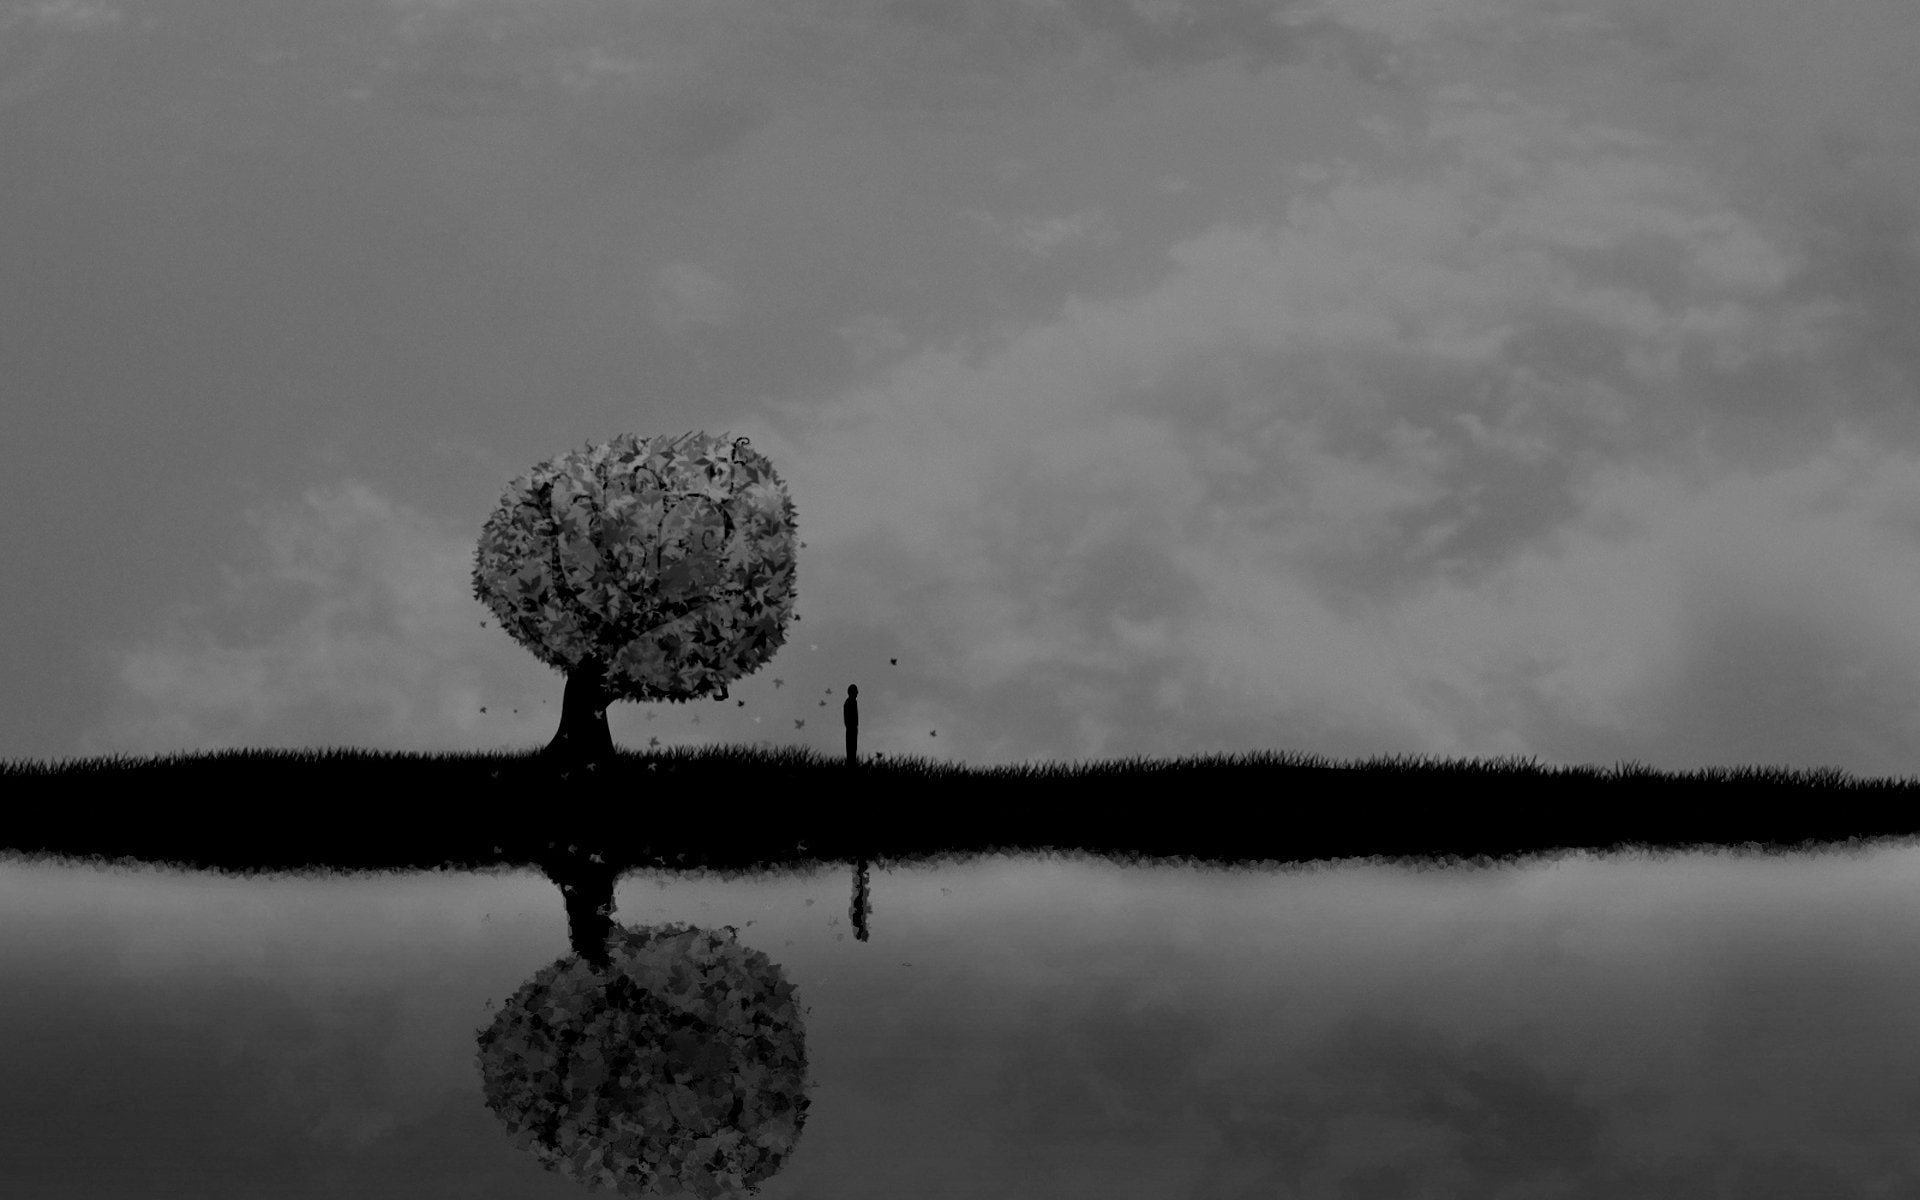 Alone, art, clouds, Dark, horror, lakes, mood, People, reflection